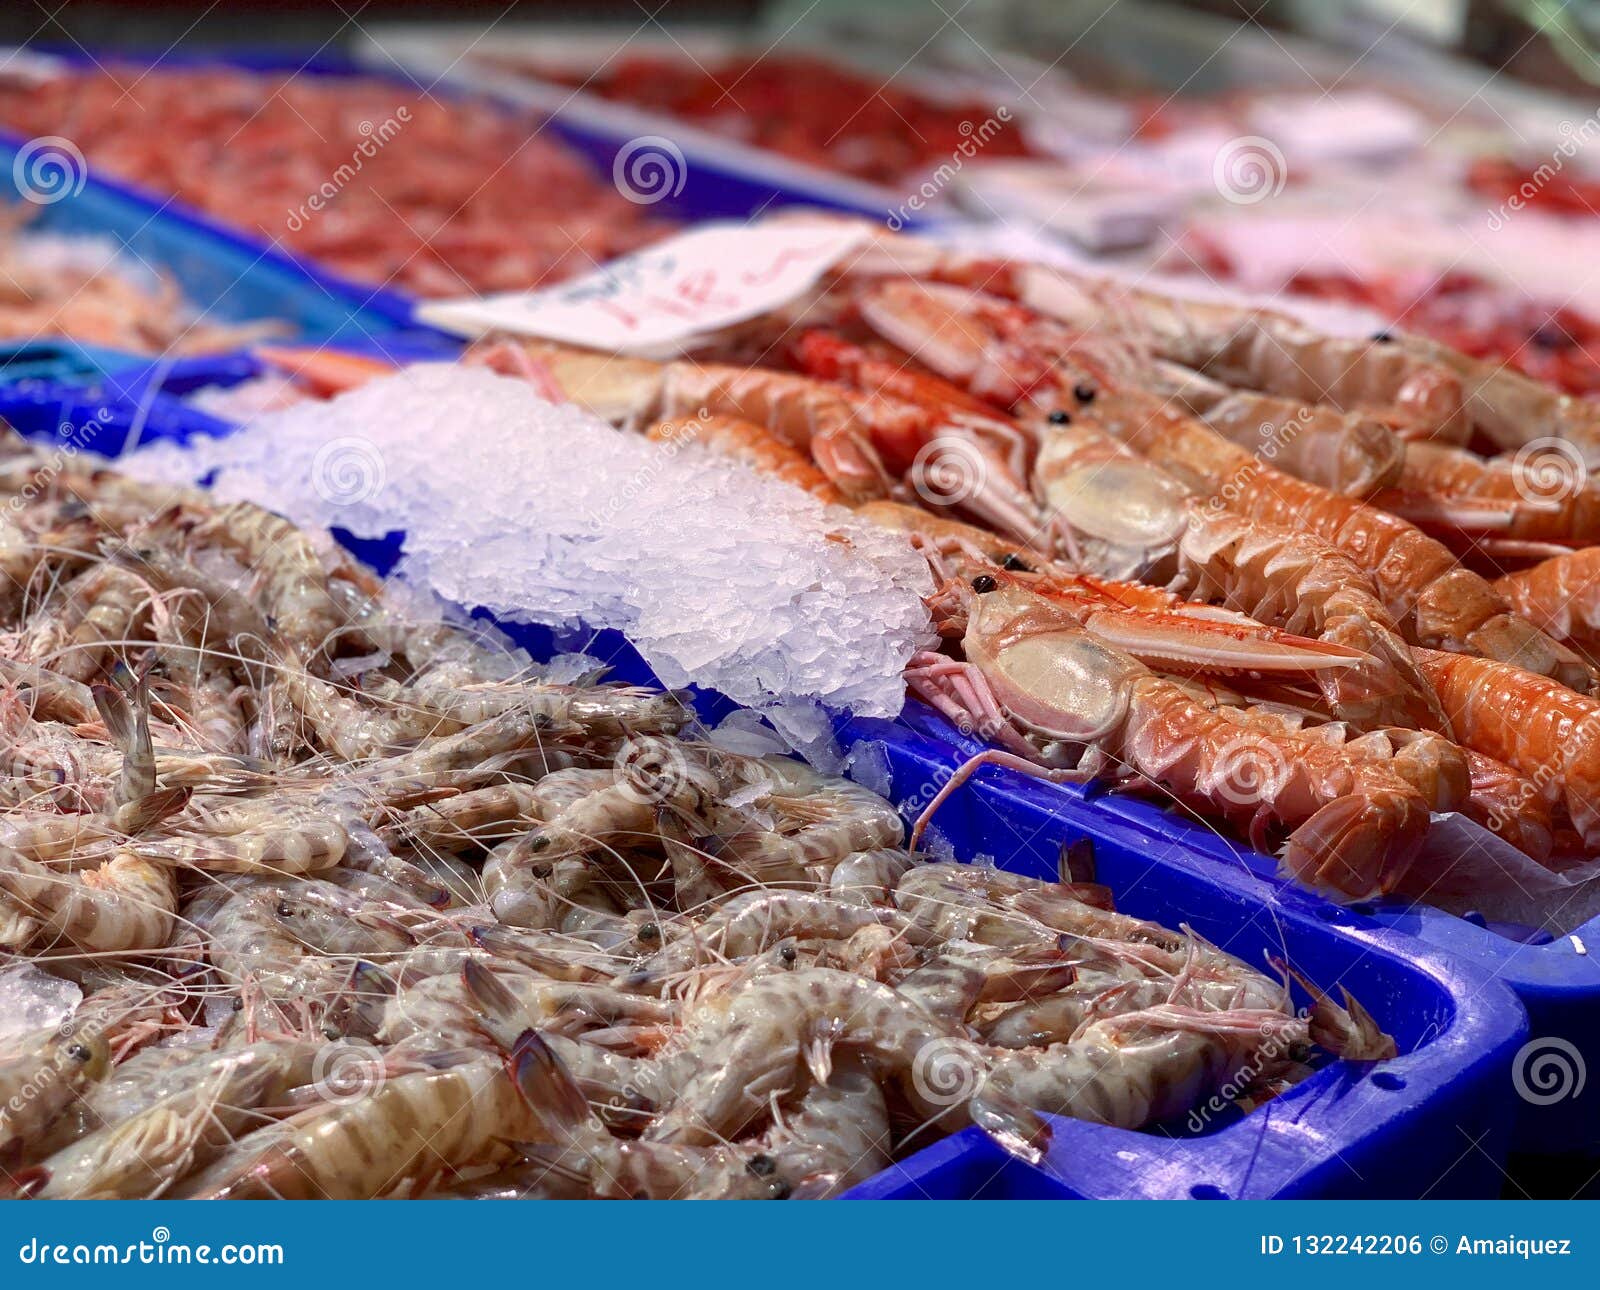 fresh seafood in a food market,